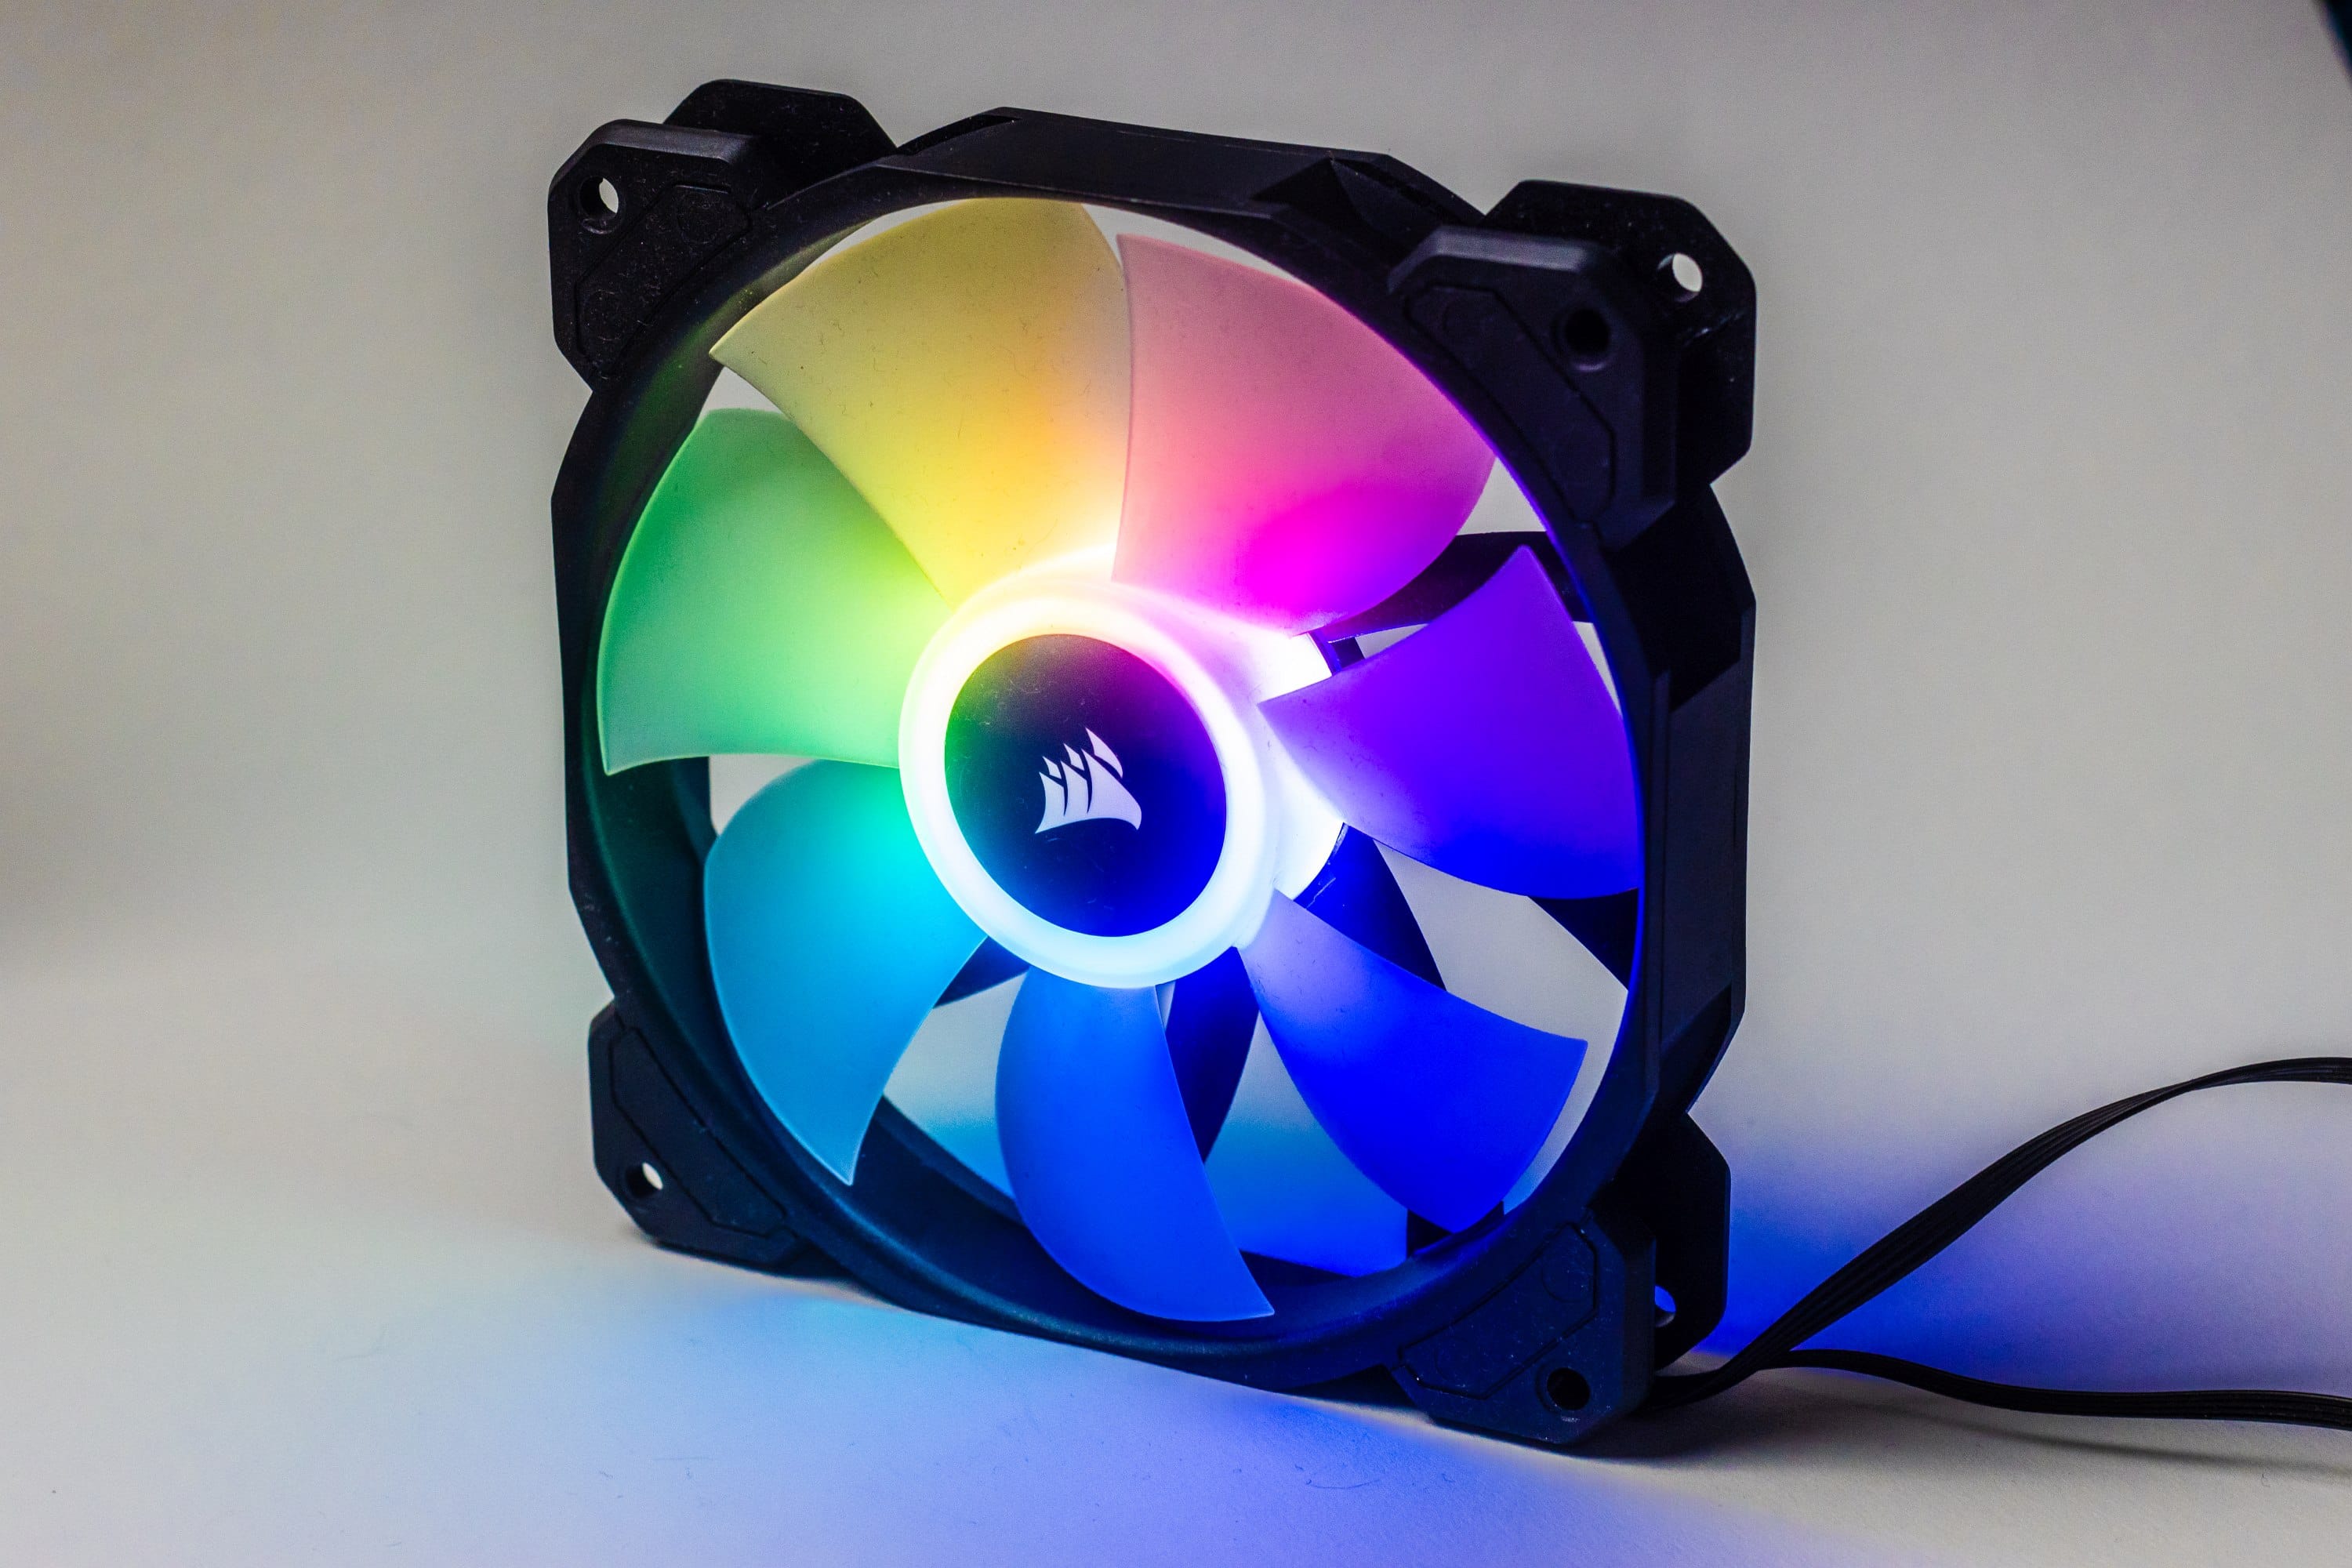 Corsair SP RGB Elite fan put the test pressure on! they 